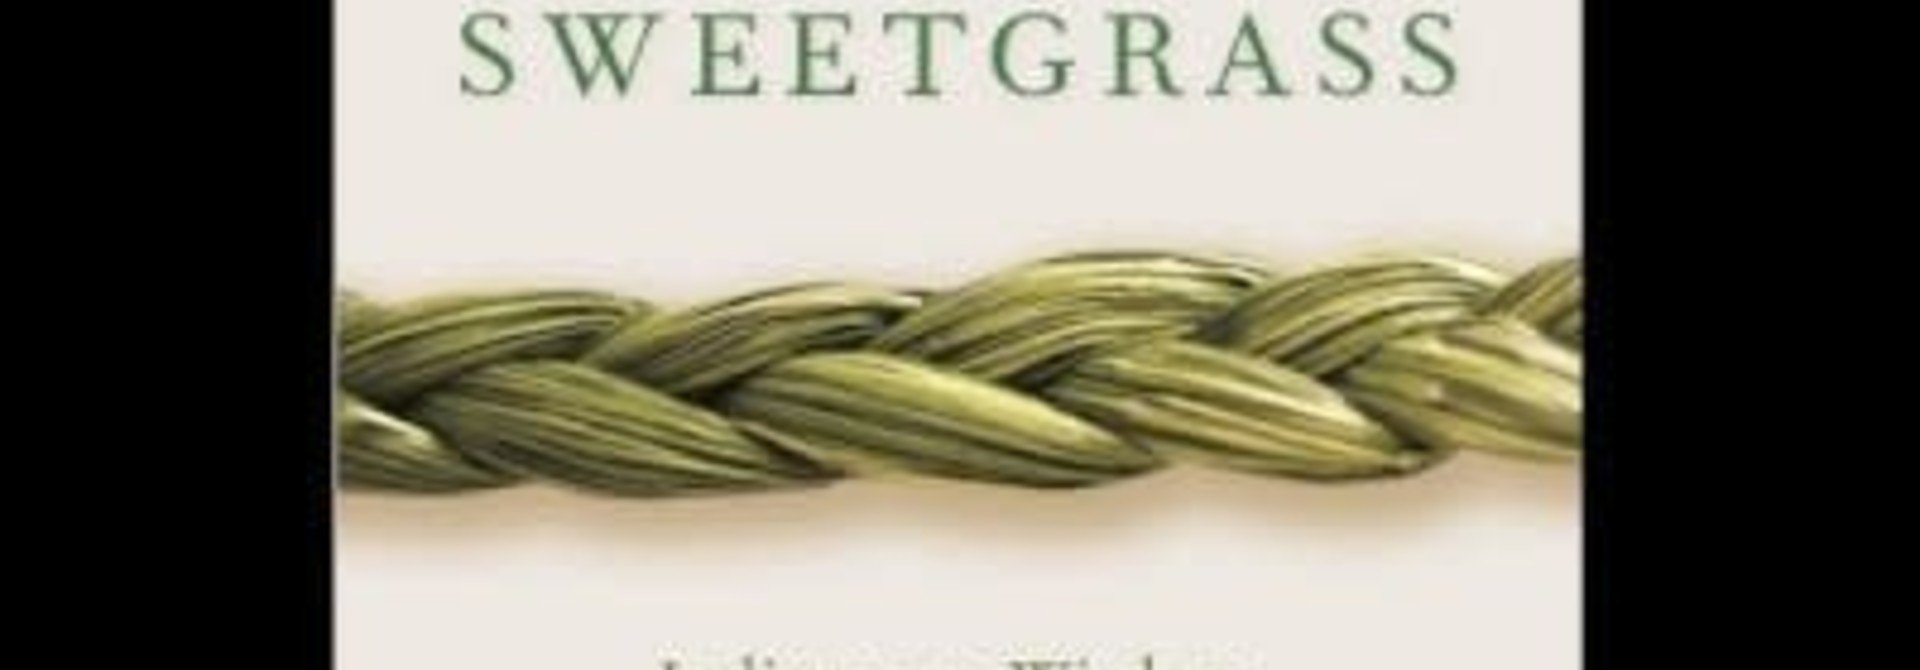 Book-Braiding Sweetgrass by Robin Wall Kimmerer